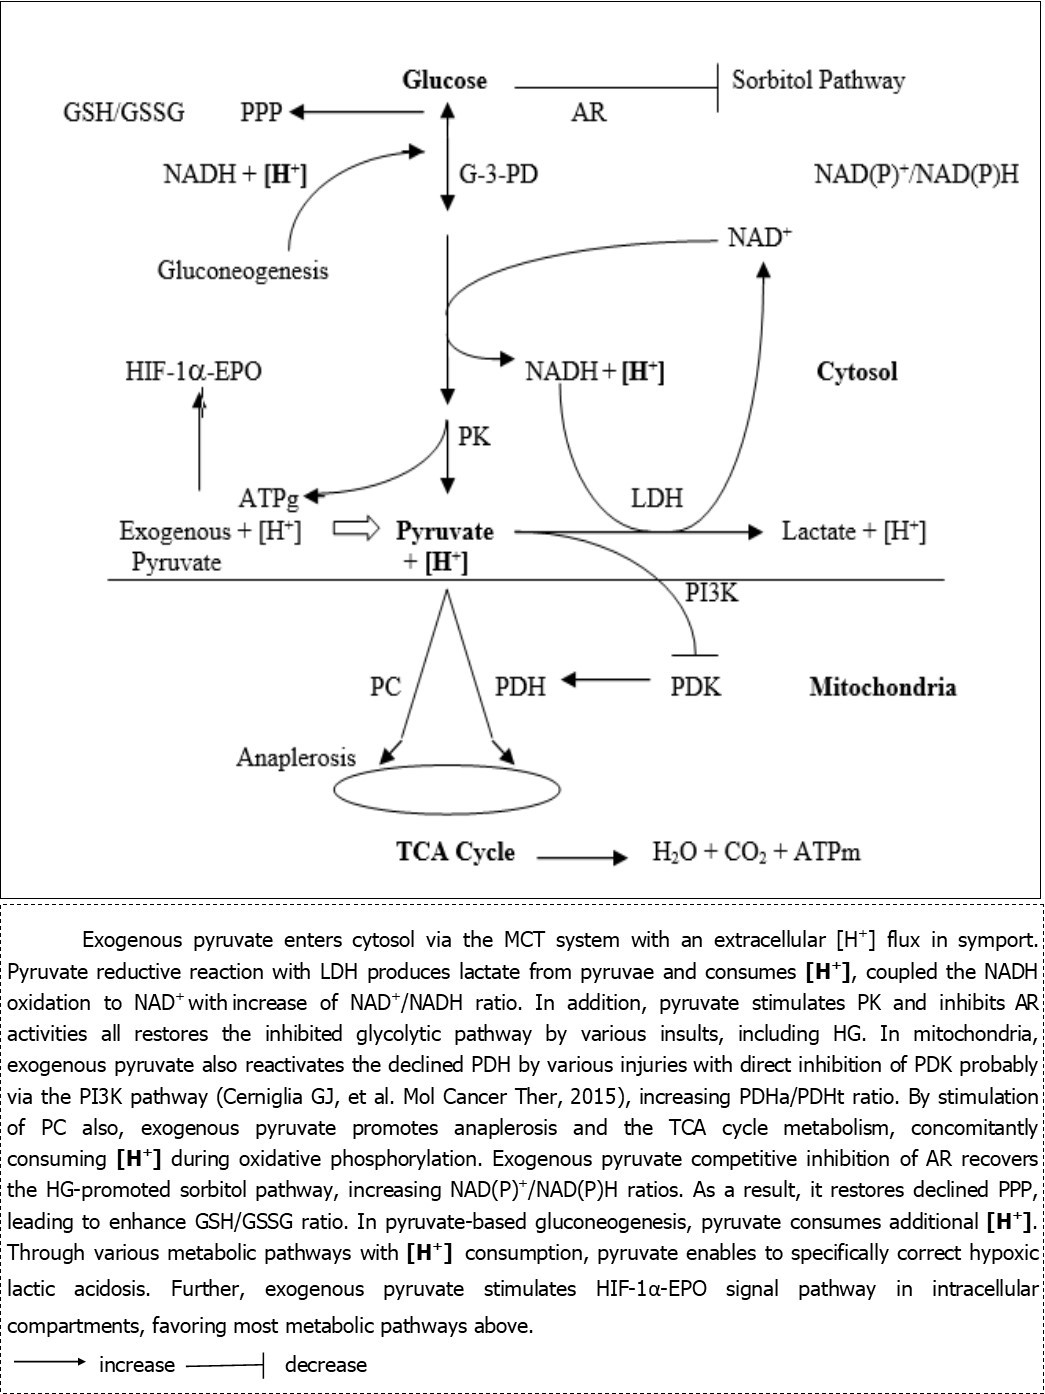  Exogenous and glycolytic pyruvate metabolic pathways and intracellular hydrogen (H+)                          consumption in various injuries 